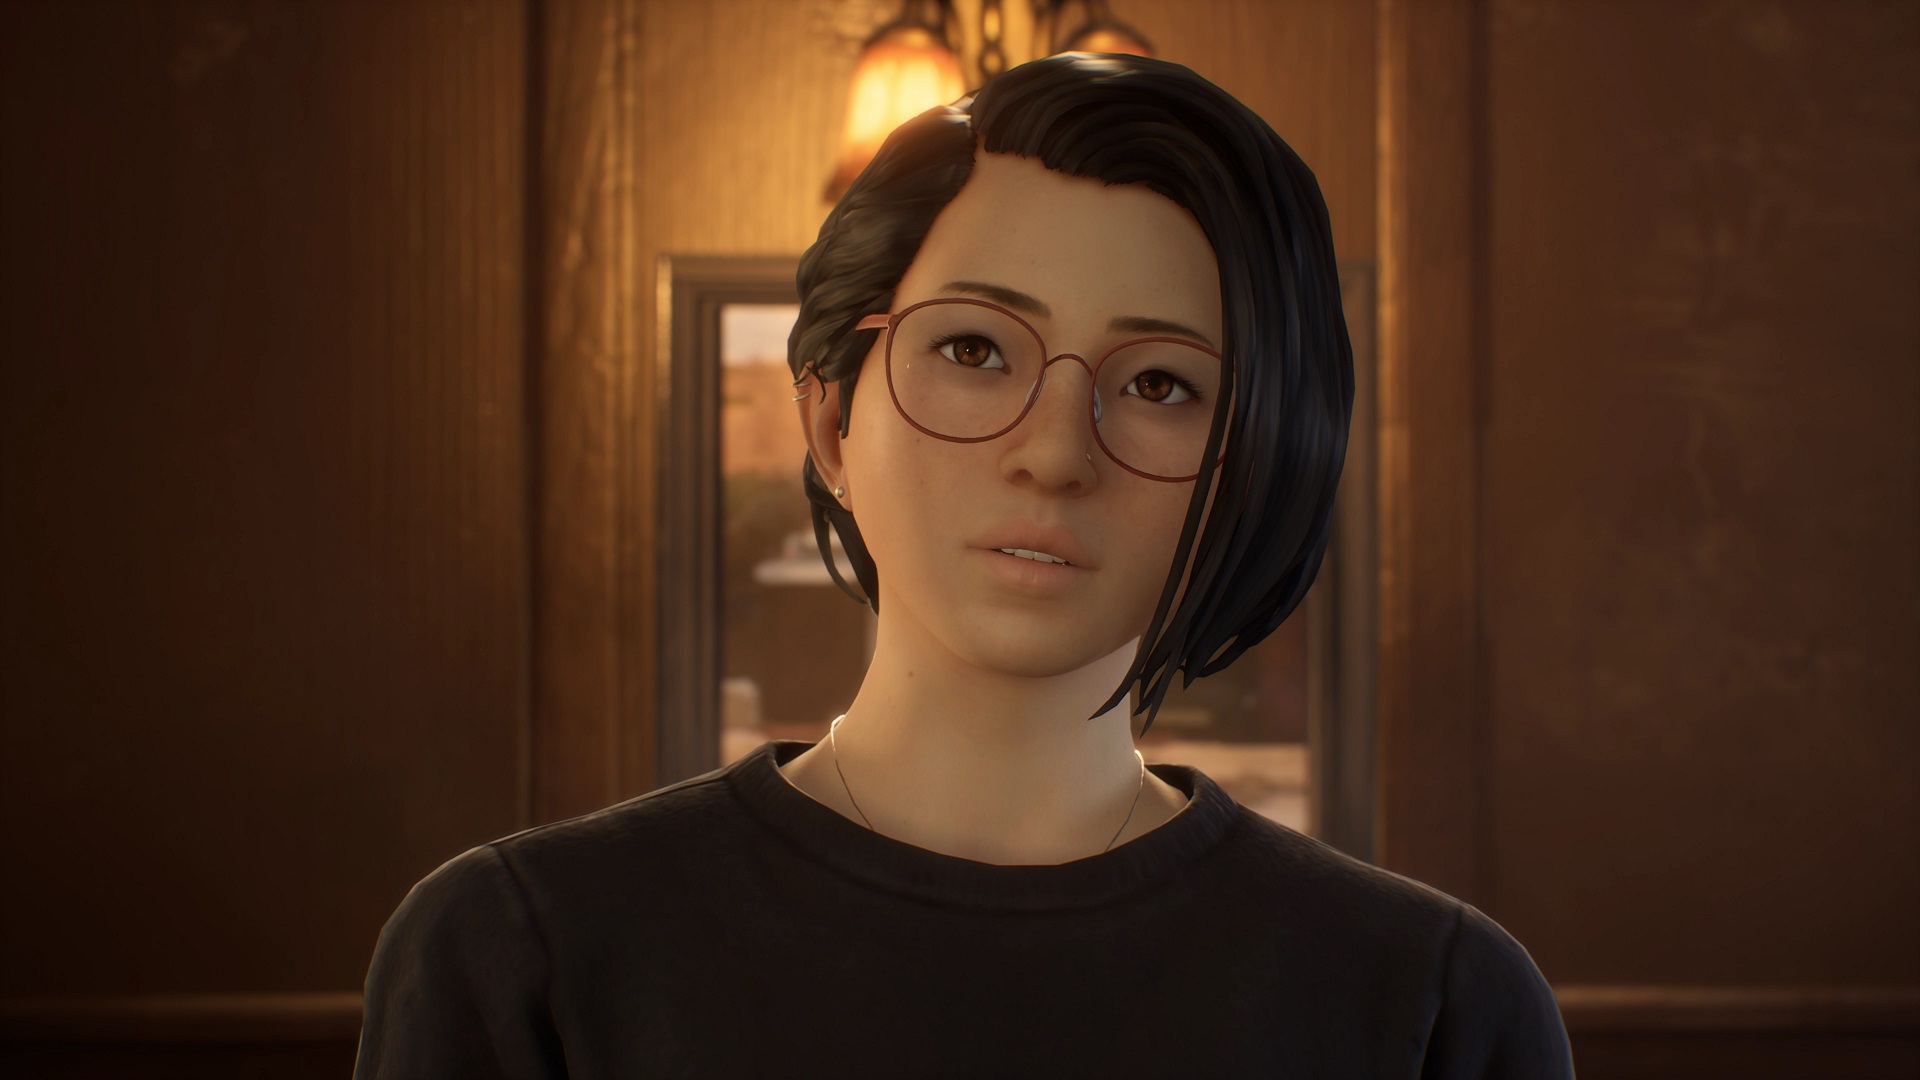 Experience another emotional story with Life Is Strange: True Colors